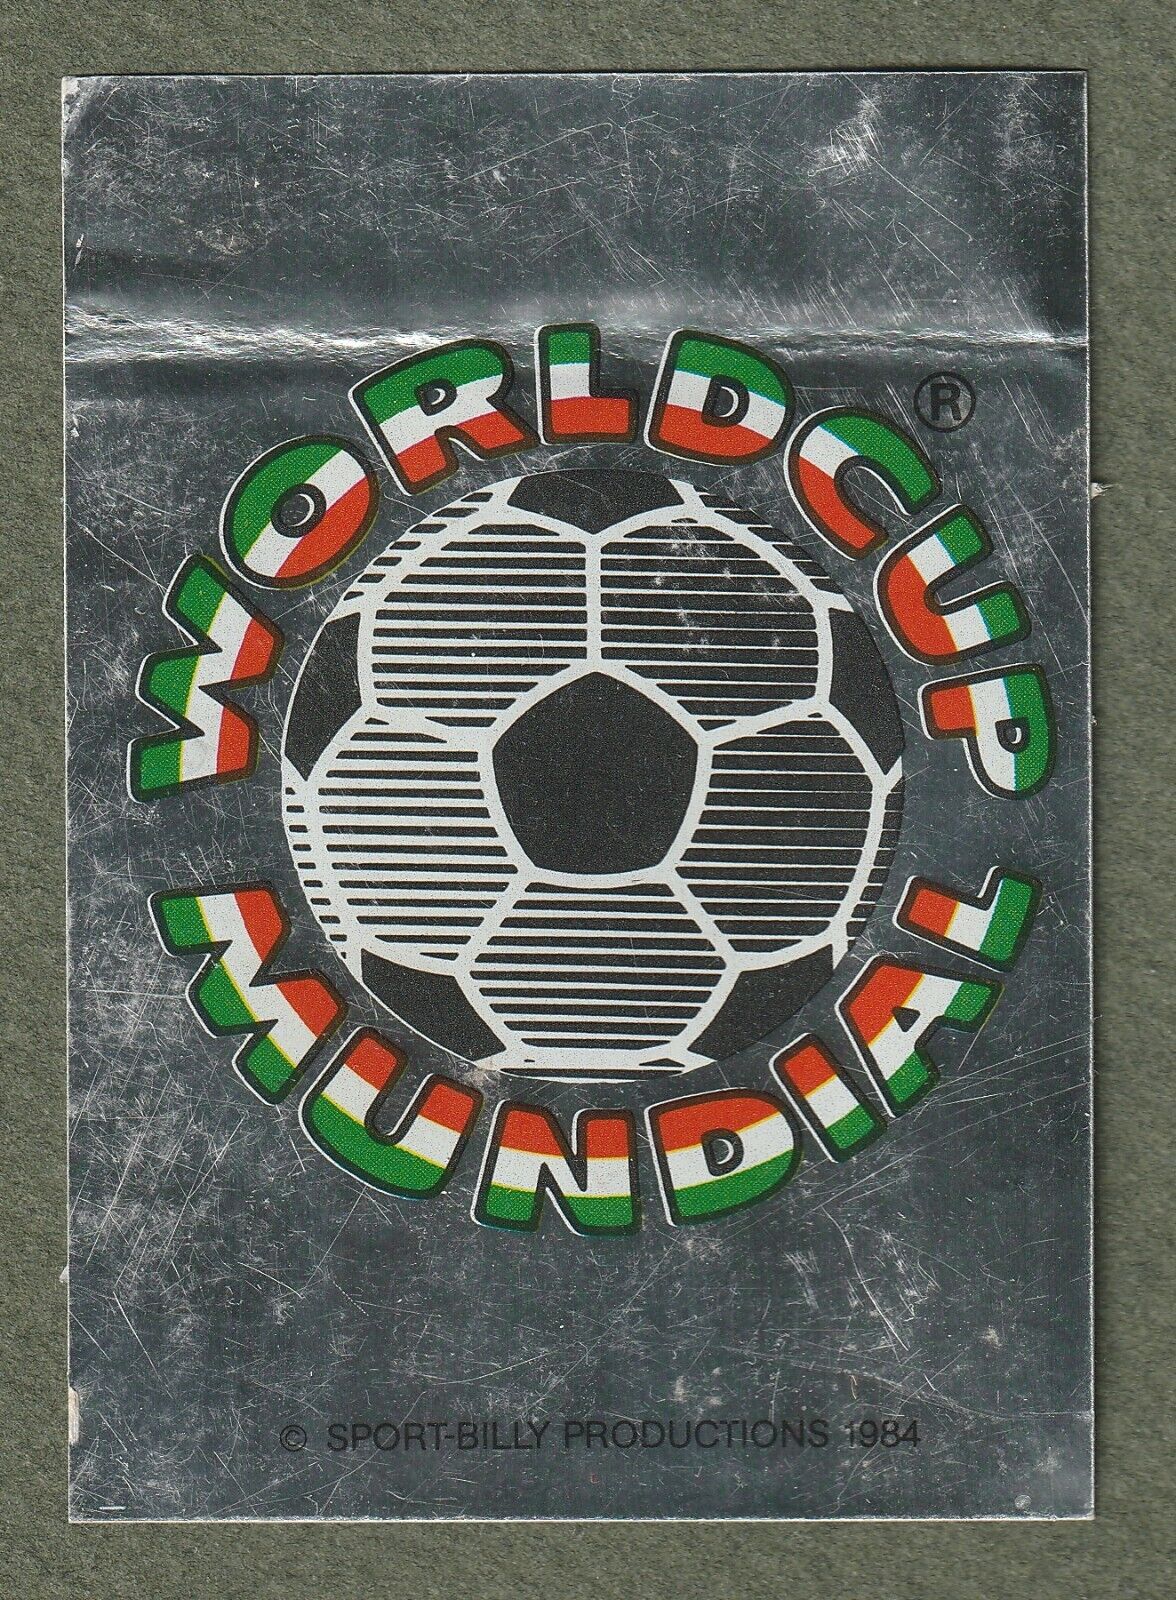 1986 Mexico PANINI World Cup Sticker Removed Triggered 2nd Chance Recup 86 1-217